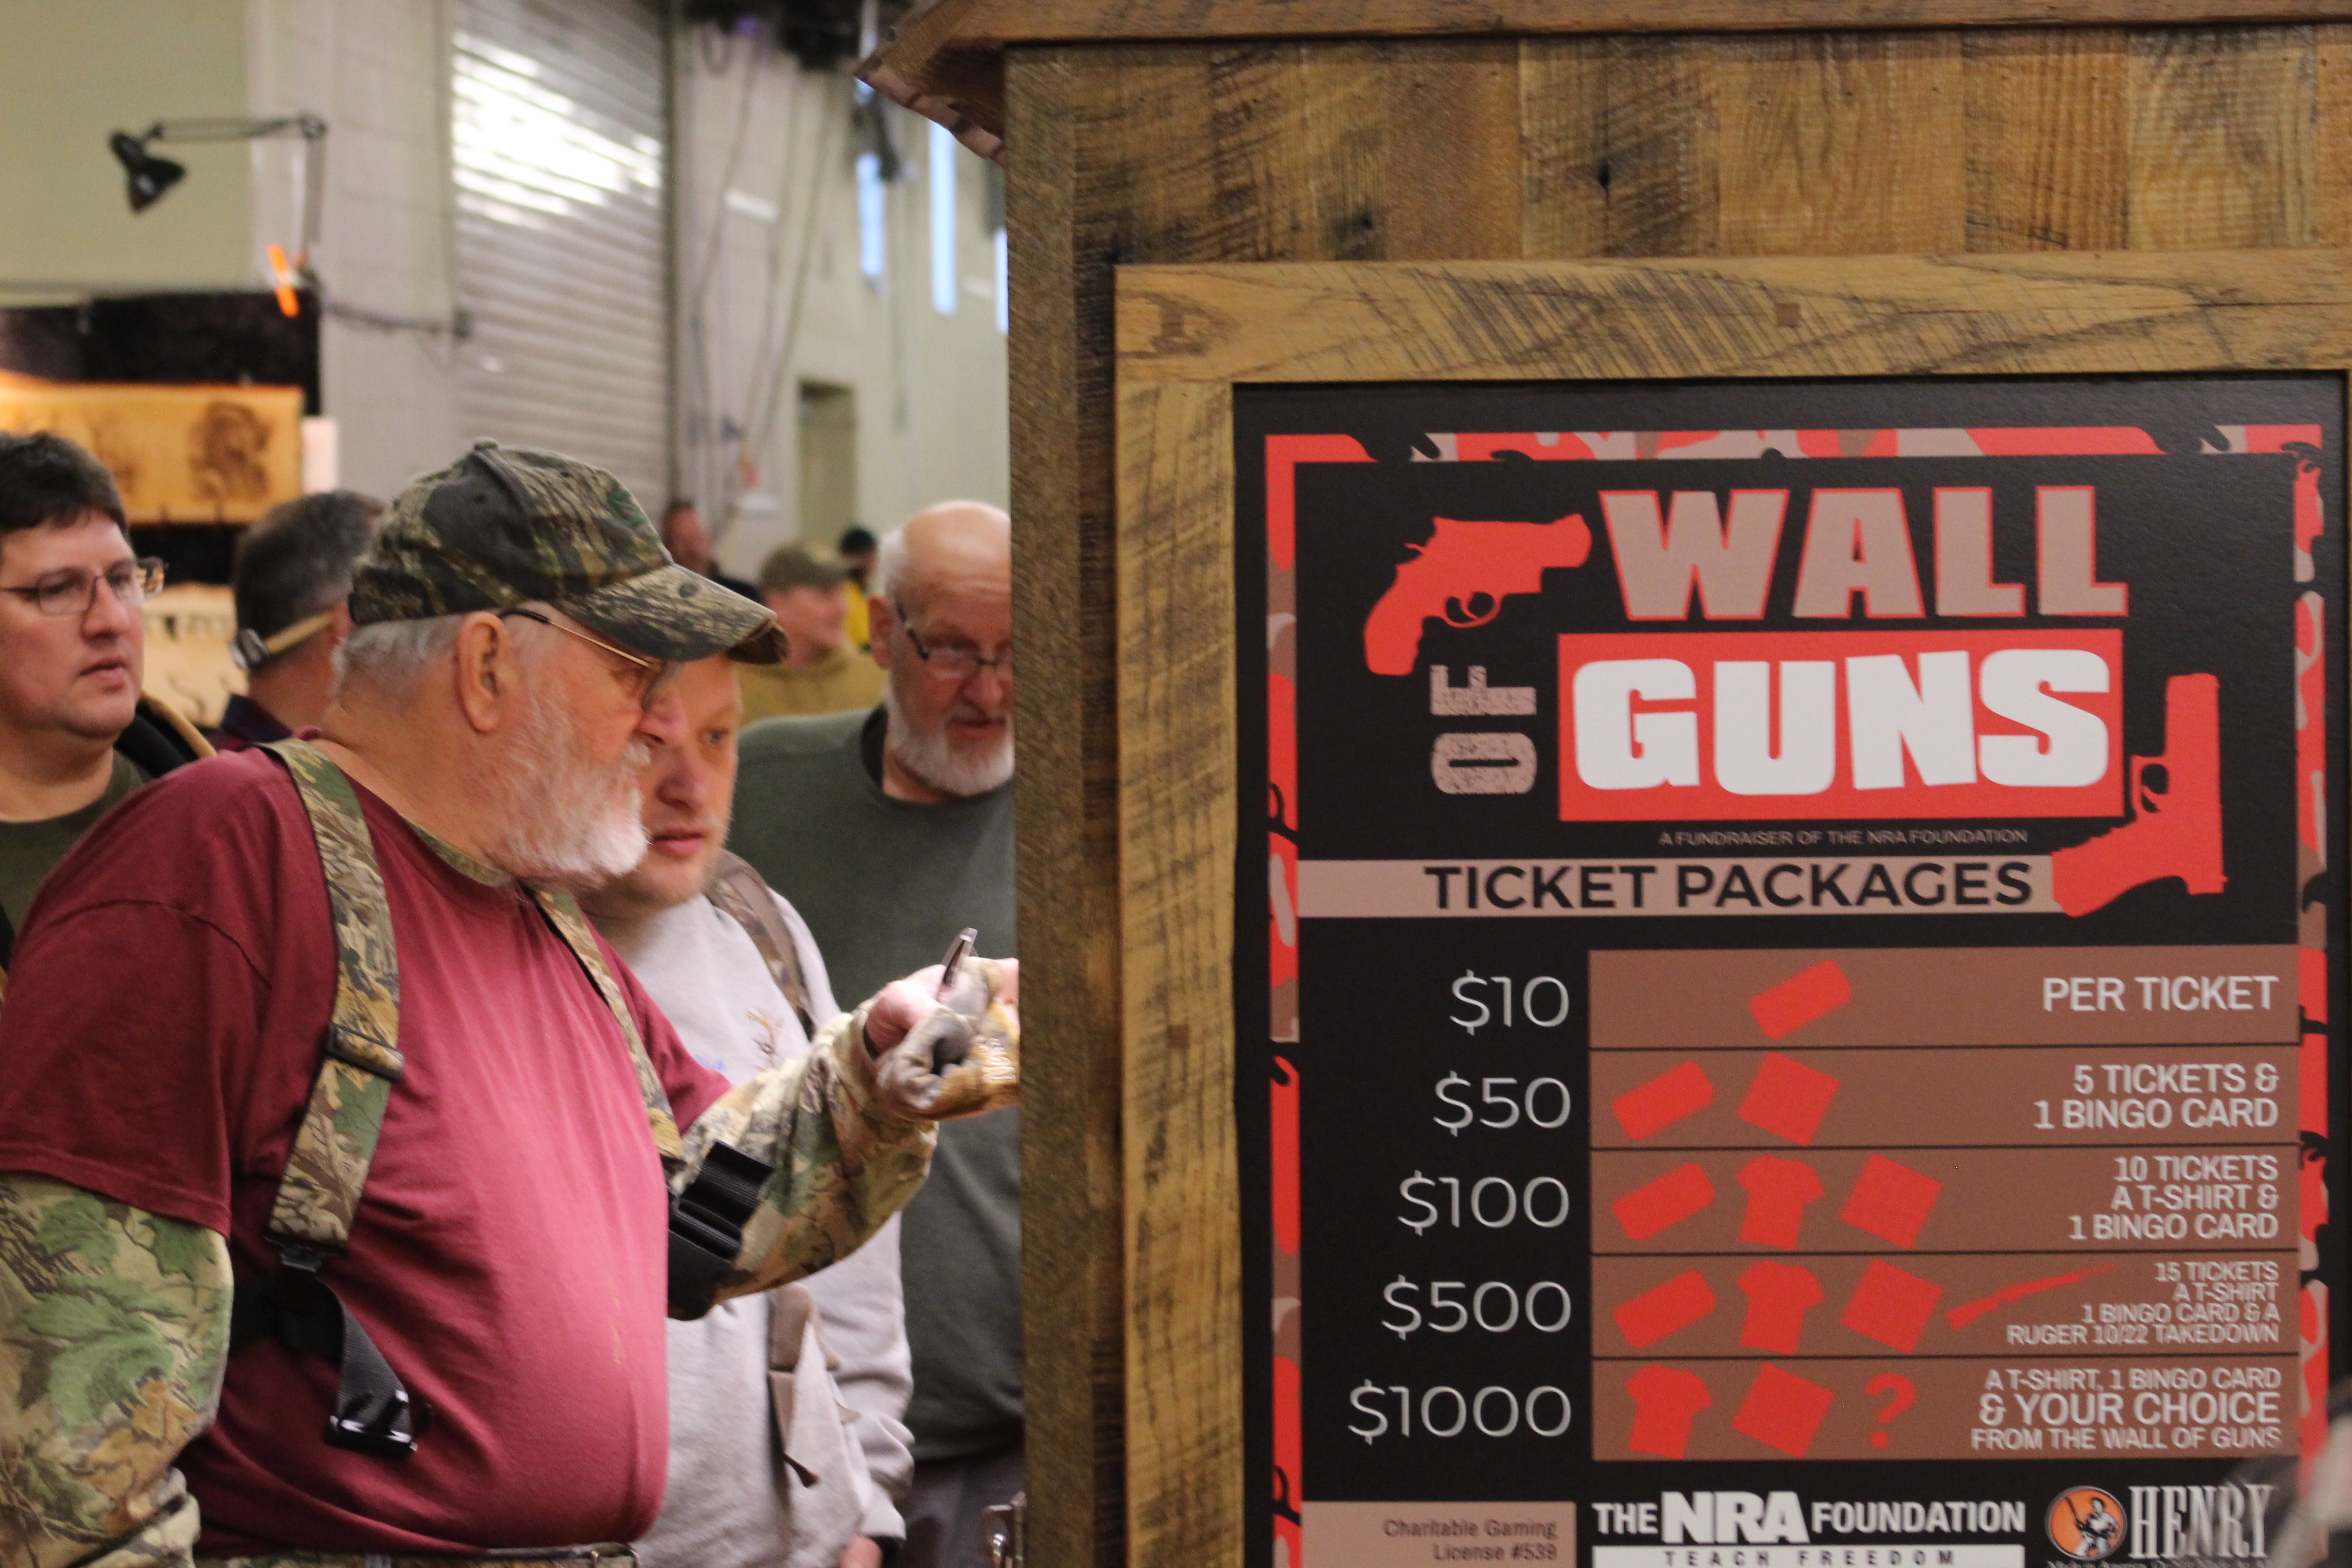 Wall of Guns returns to the Great American Outdoor Show